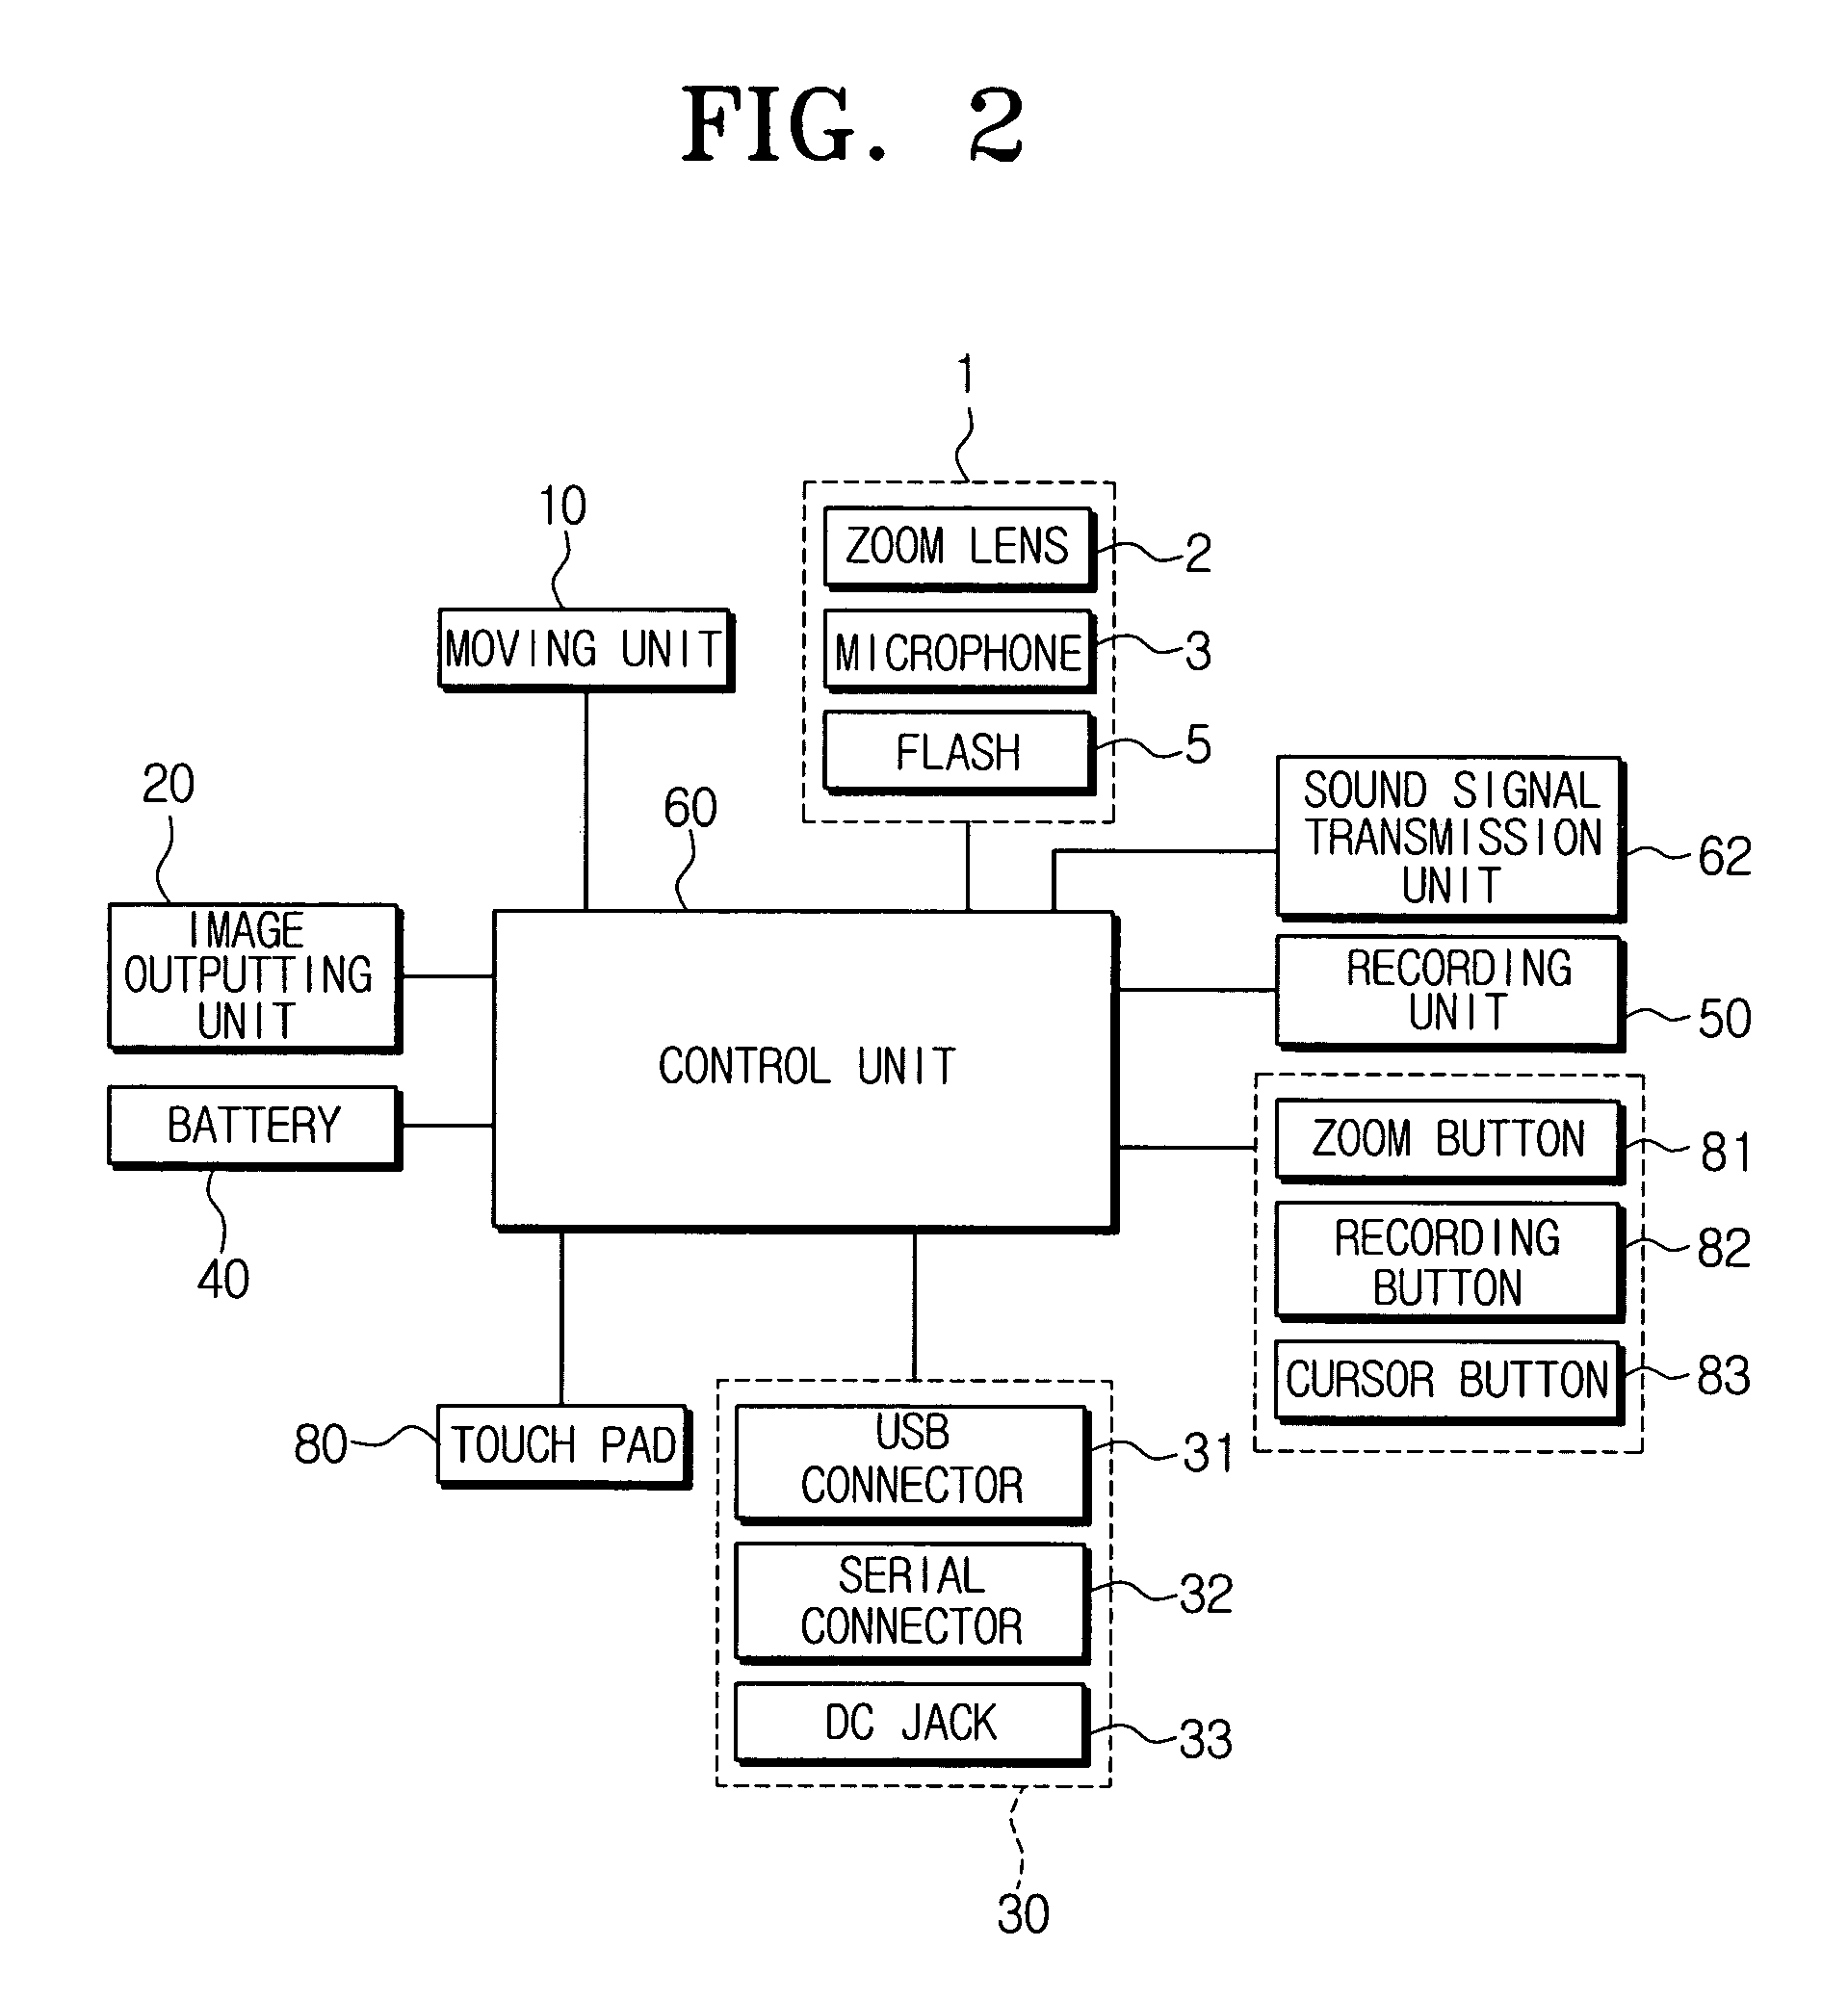 Appearing and disappearing type image pickup device